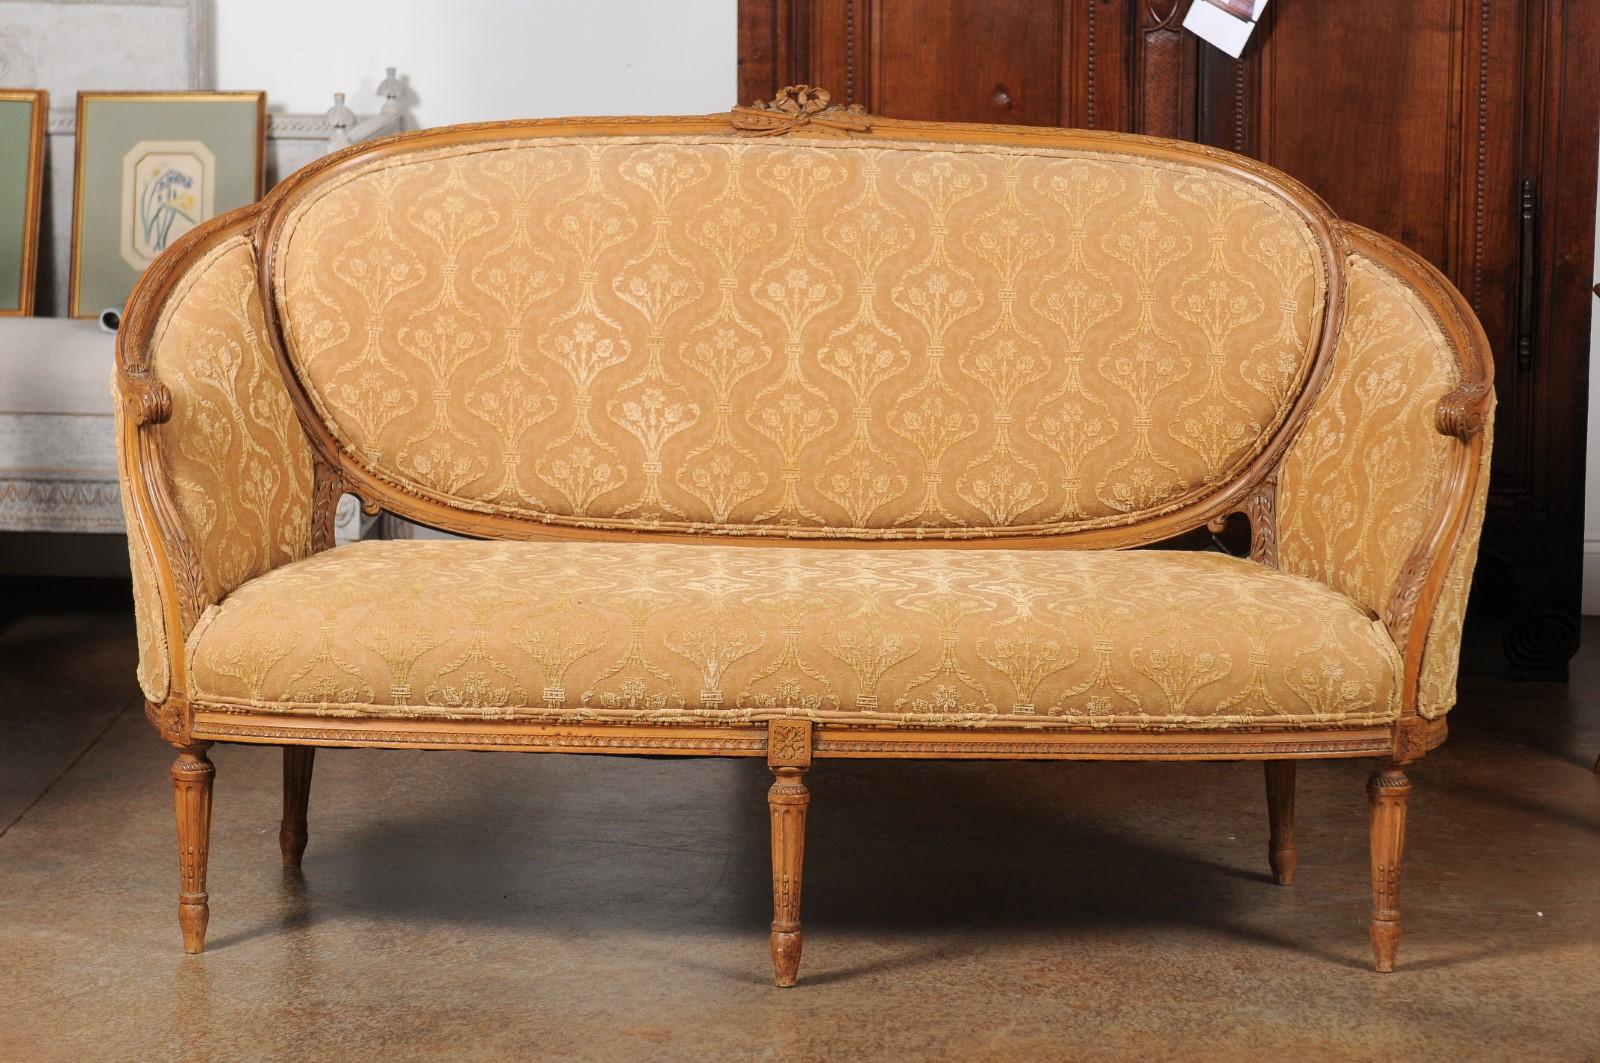 A French Louis XVI style 'canapé en corbeille' from the 19th century, with carved crest, fluted legs and upholstery. Created in France during the 19th century, this canapé features a wraparound back accented with ribbon-tied foliage and flute. The